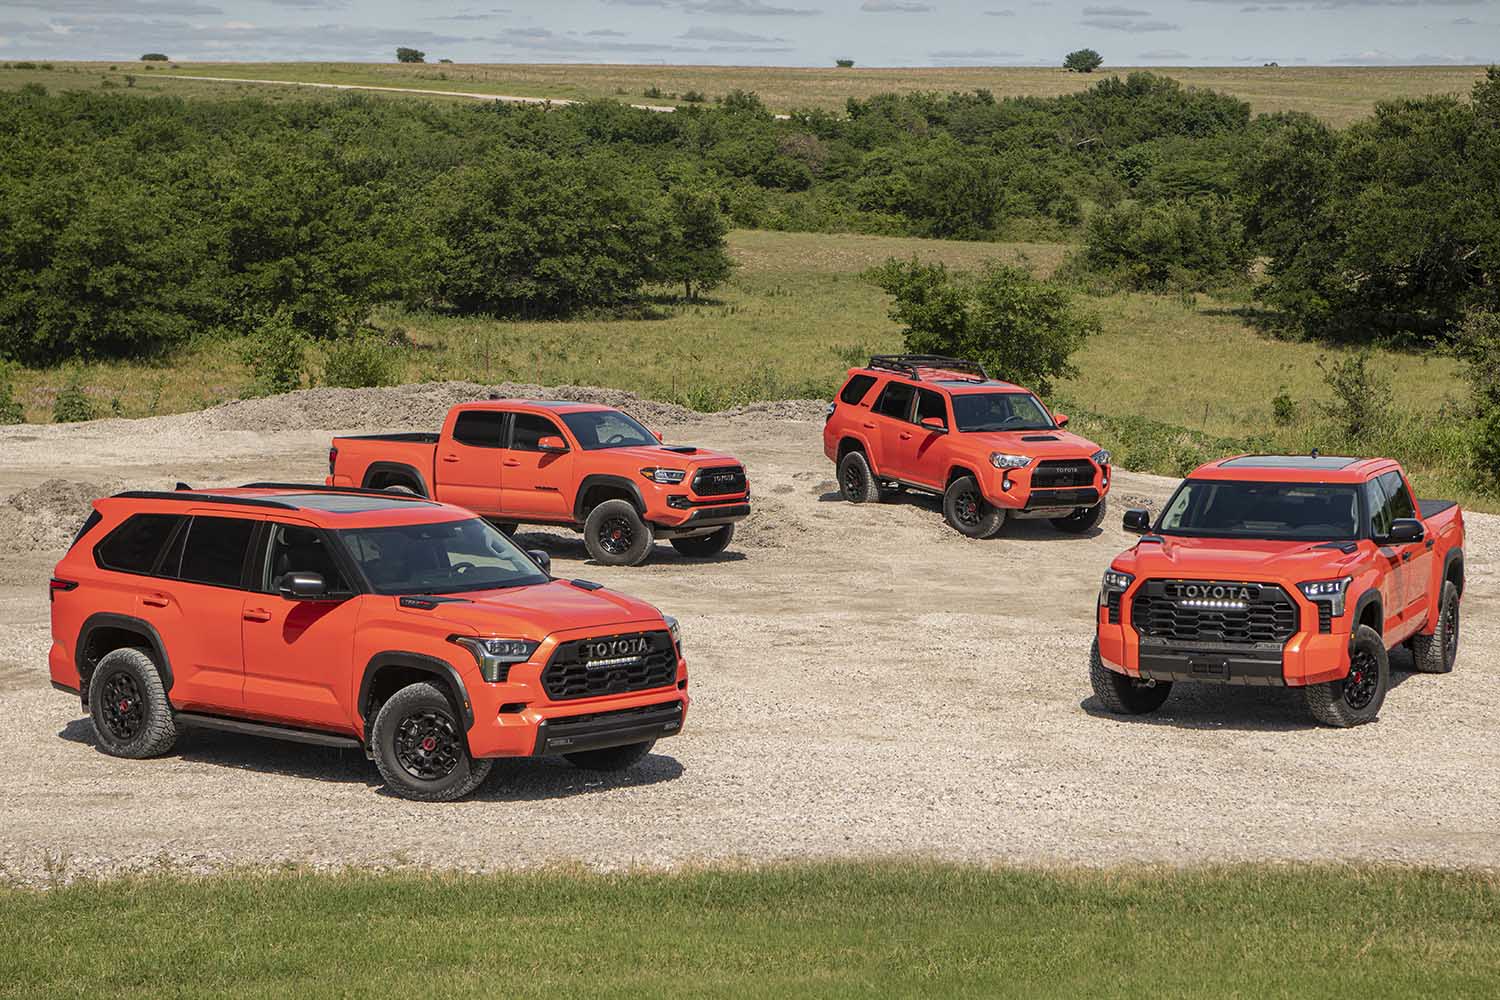 TRD versions of the Toyota Sequoia, Toyota Tundra, Toyota Tacoma, and Toyota 4Runner